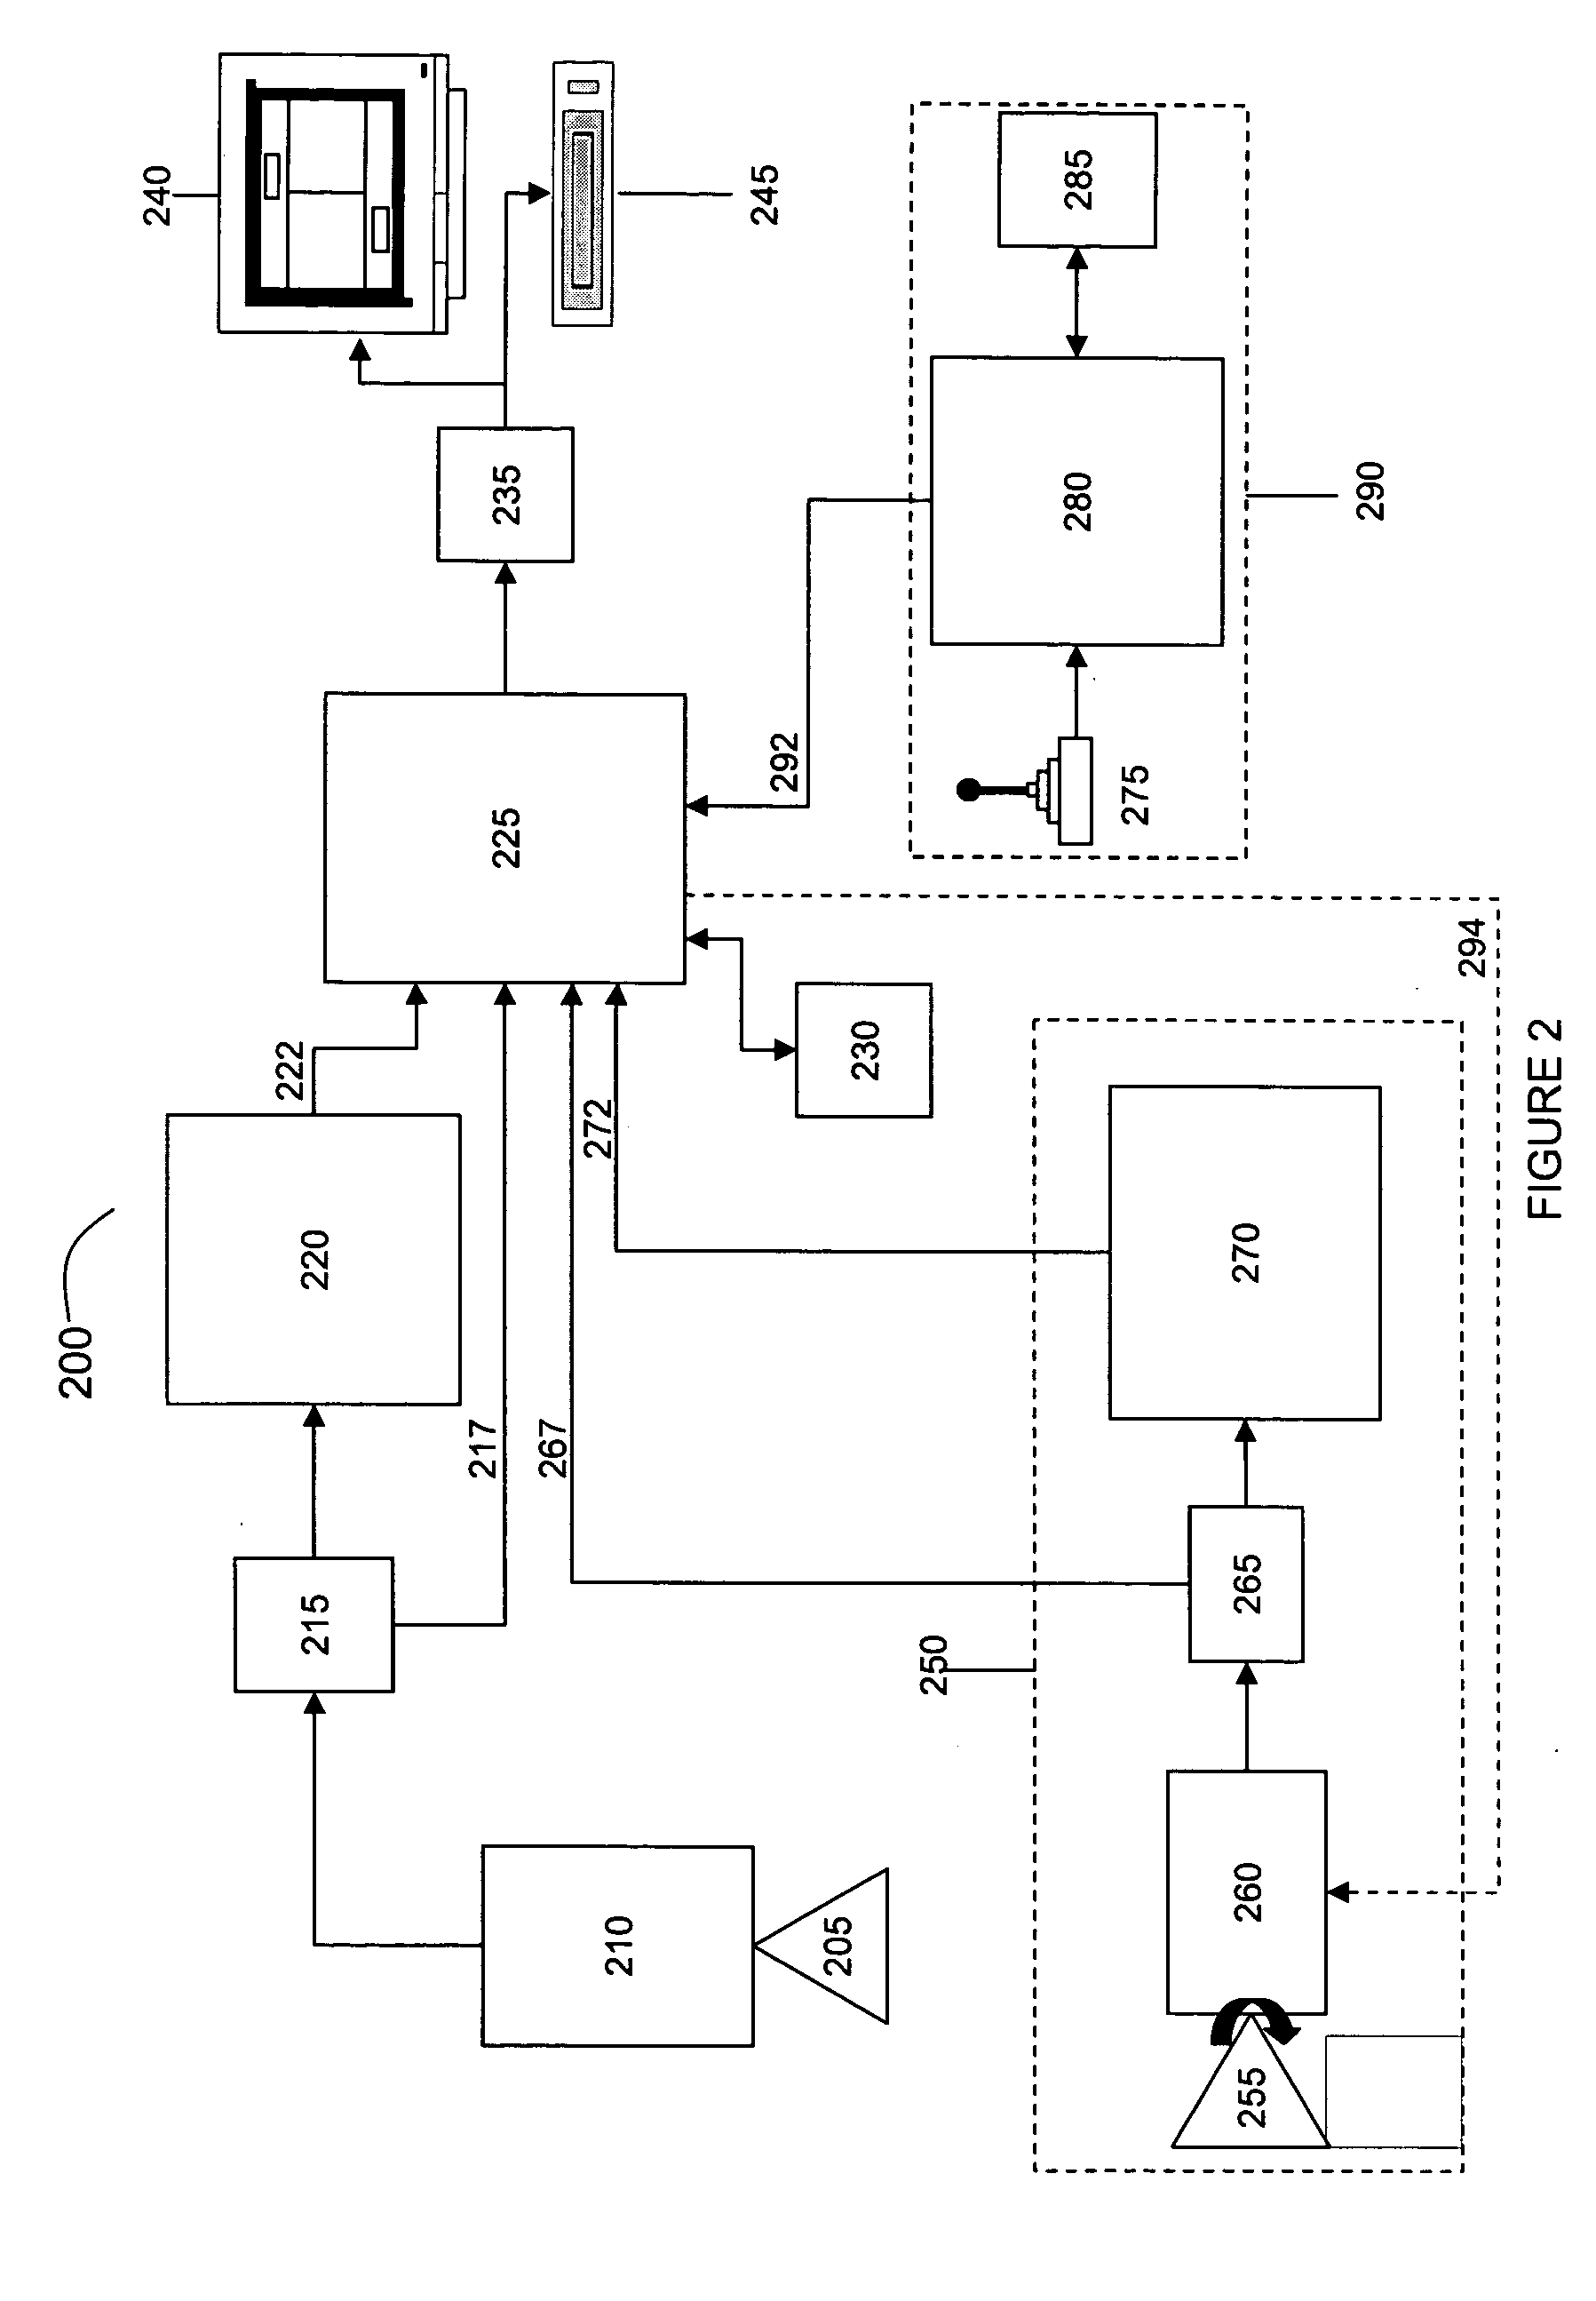 Video user interface system and method